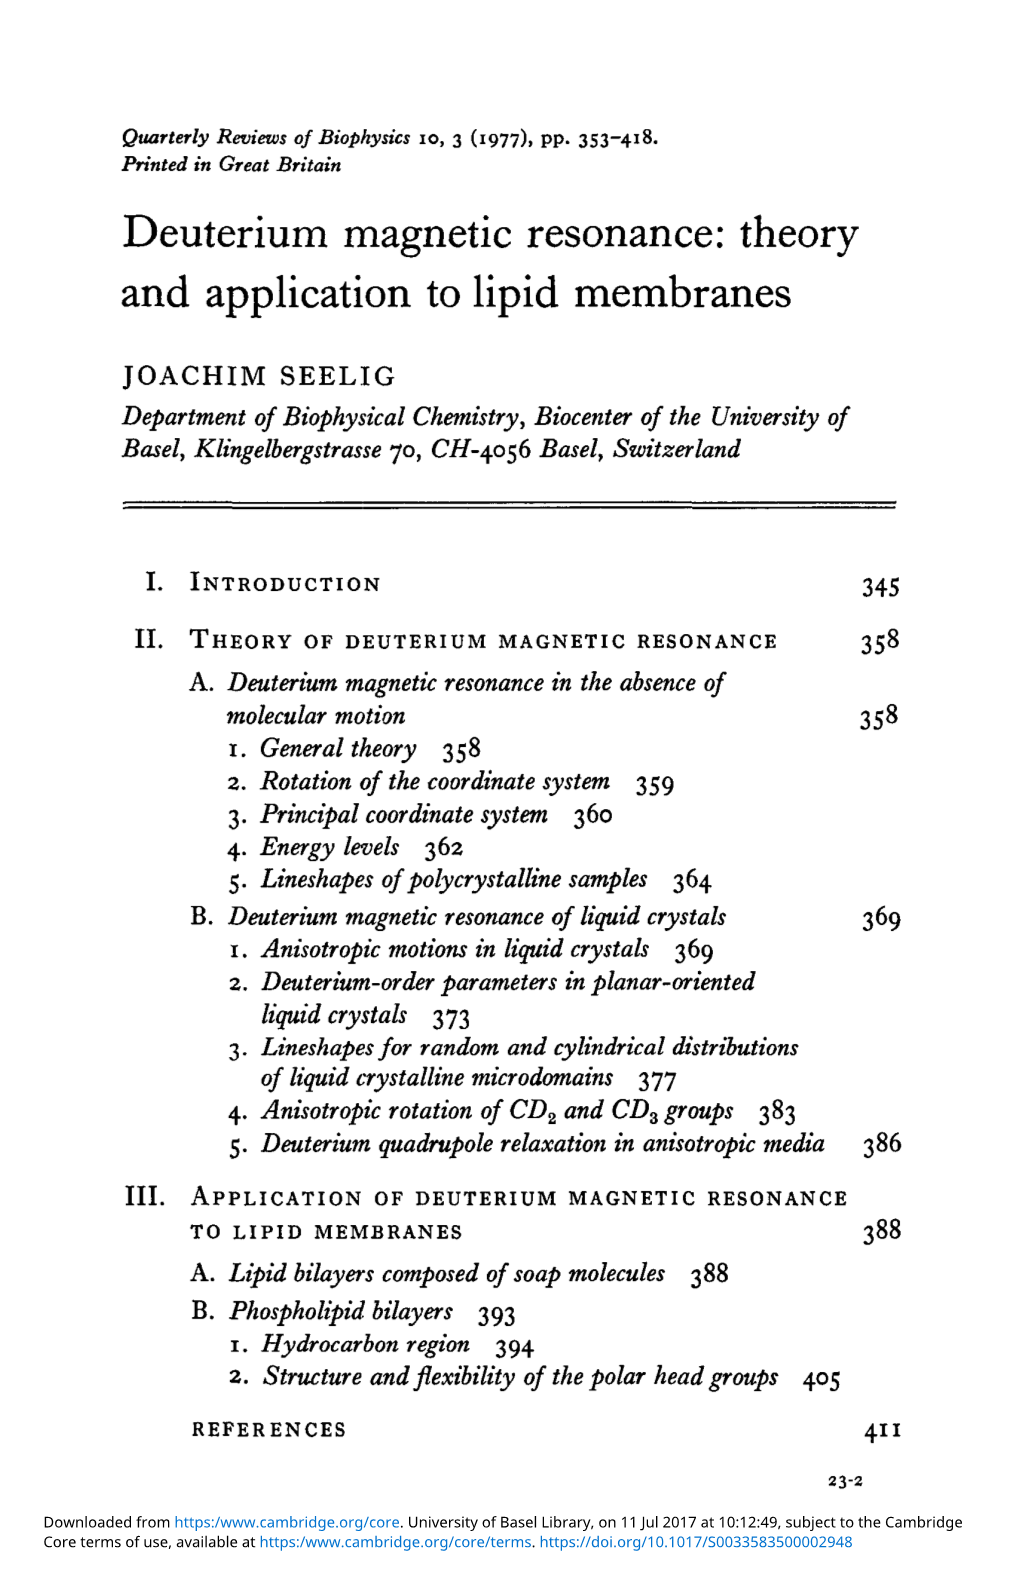 Deuterium Magnetic Resonance: Theory and Application to Lipid Membranes